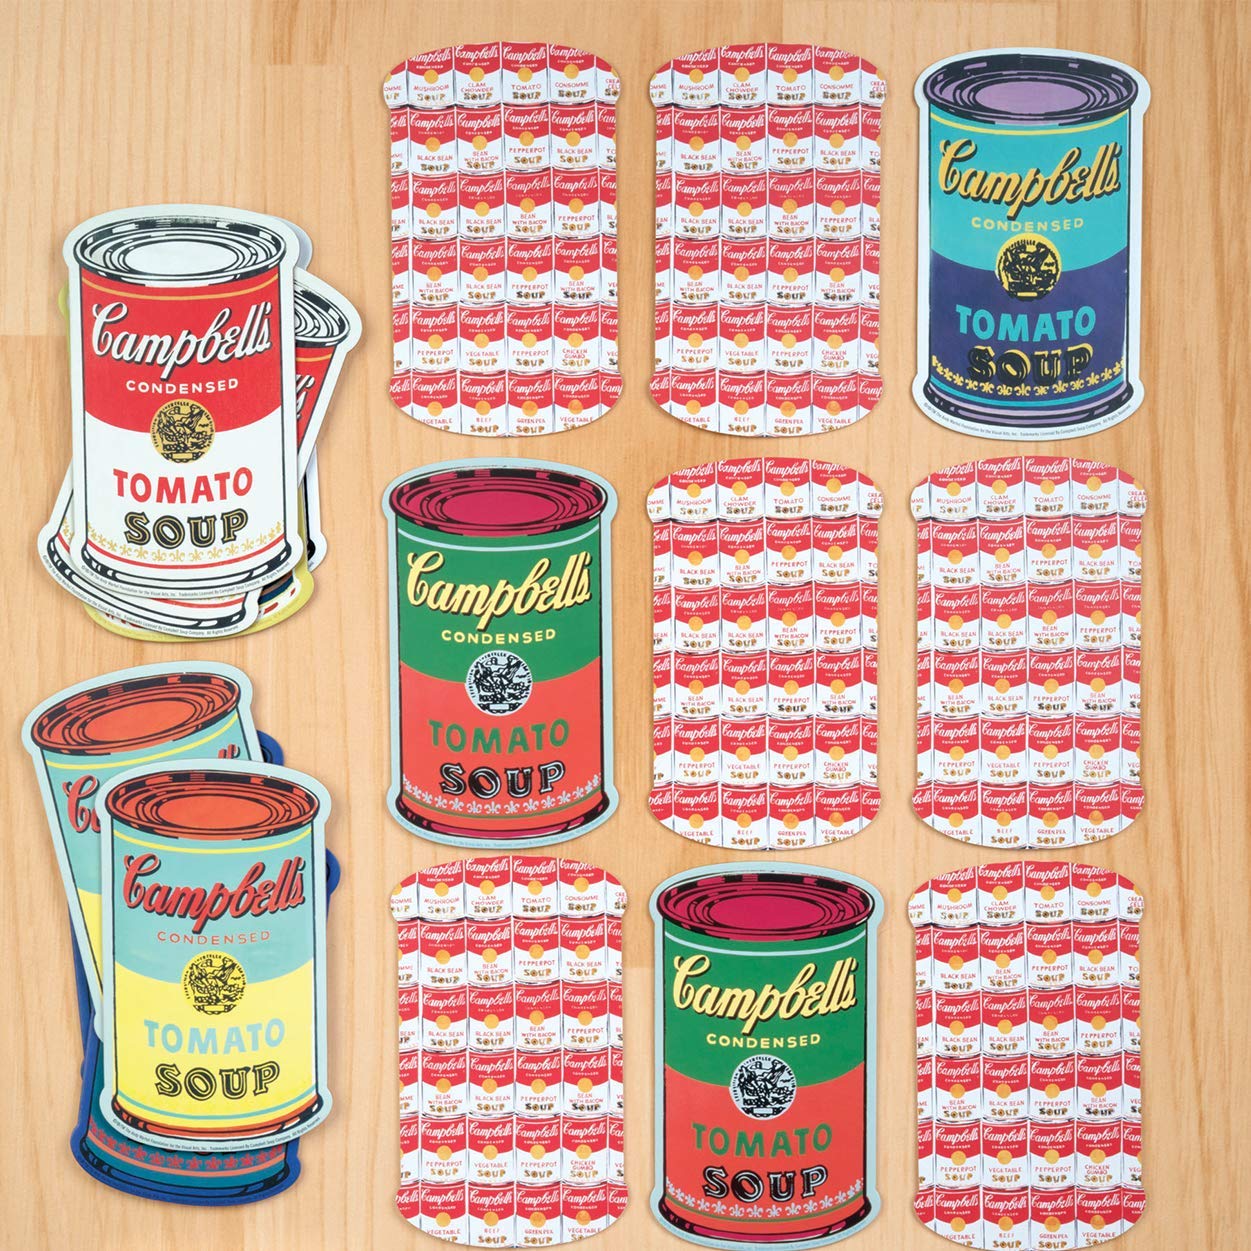 Some of the cards that are included with the Andy Warhol Memory Game. The object of the game is to memorize the cards and match the pairs.